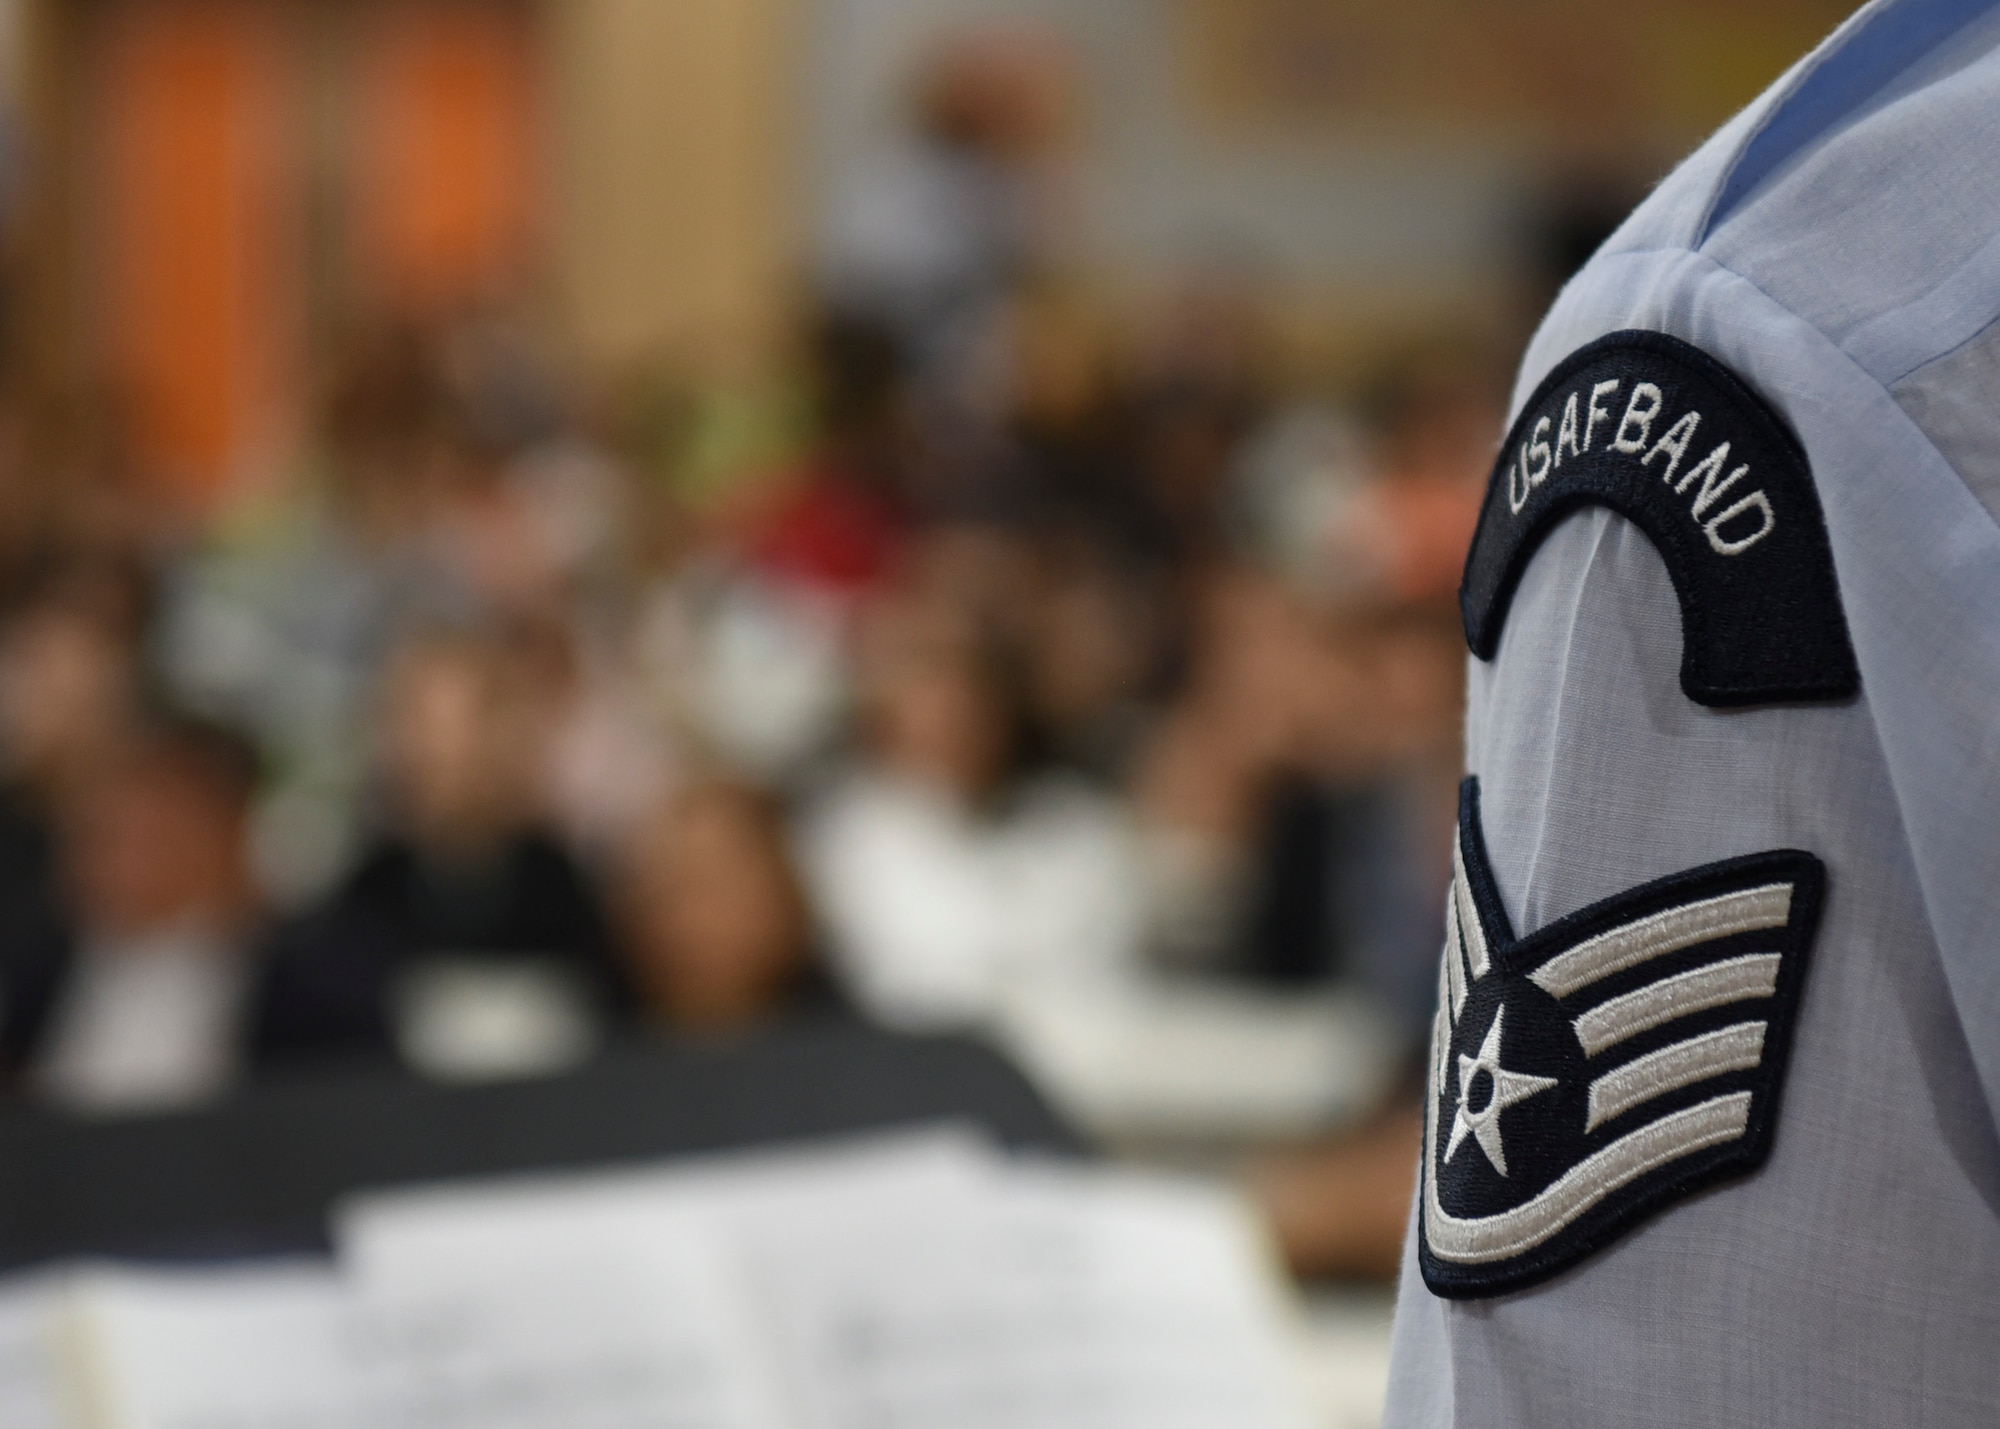 A U.S. Air Force Band of the Pacific member plays for the Gunsan Korean National Police in Gunsan City, Republic of Korea, Sept. 24, 2019. The band is stationed in Yokota Air Base, Japan and plays around 200 shows per year. (U.S. Air Force photo by Staff Sgt. Anthony Hetlage)